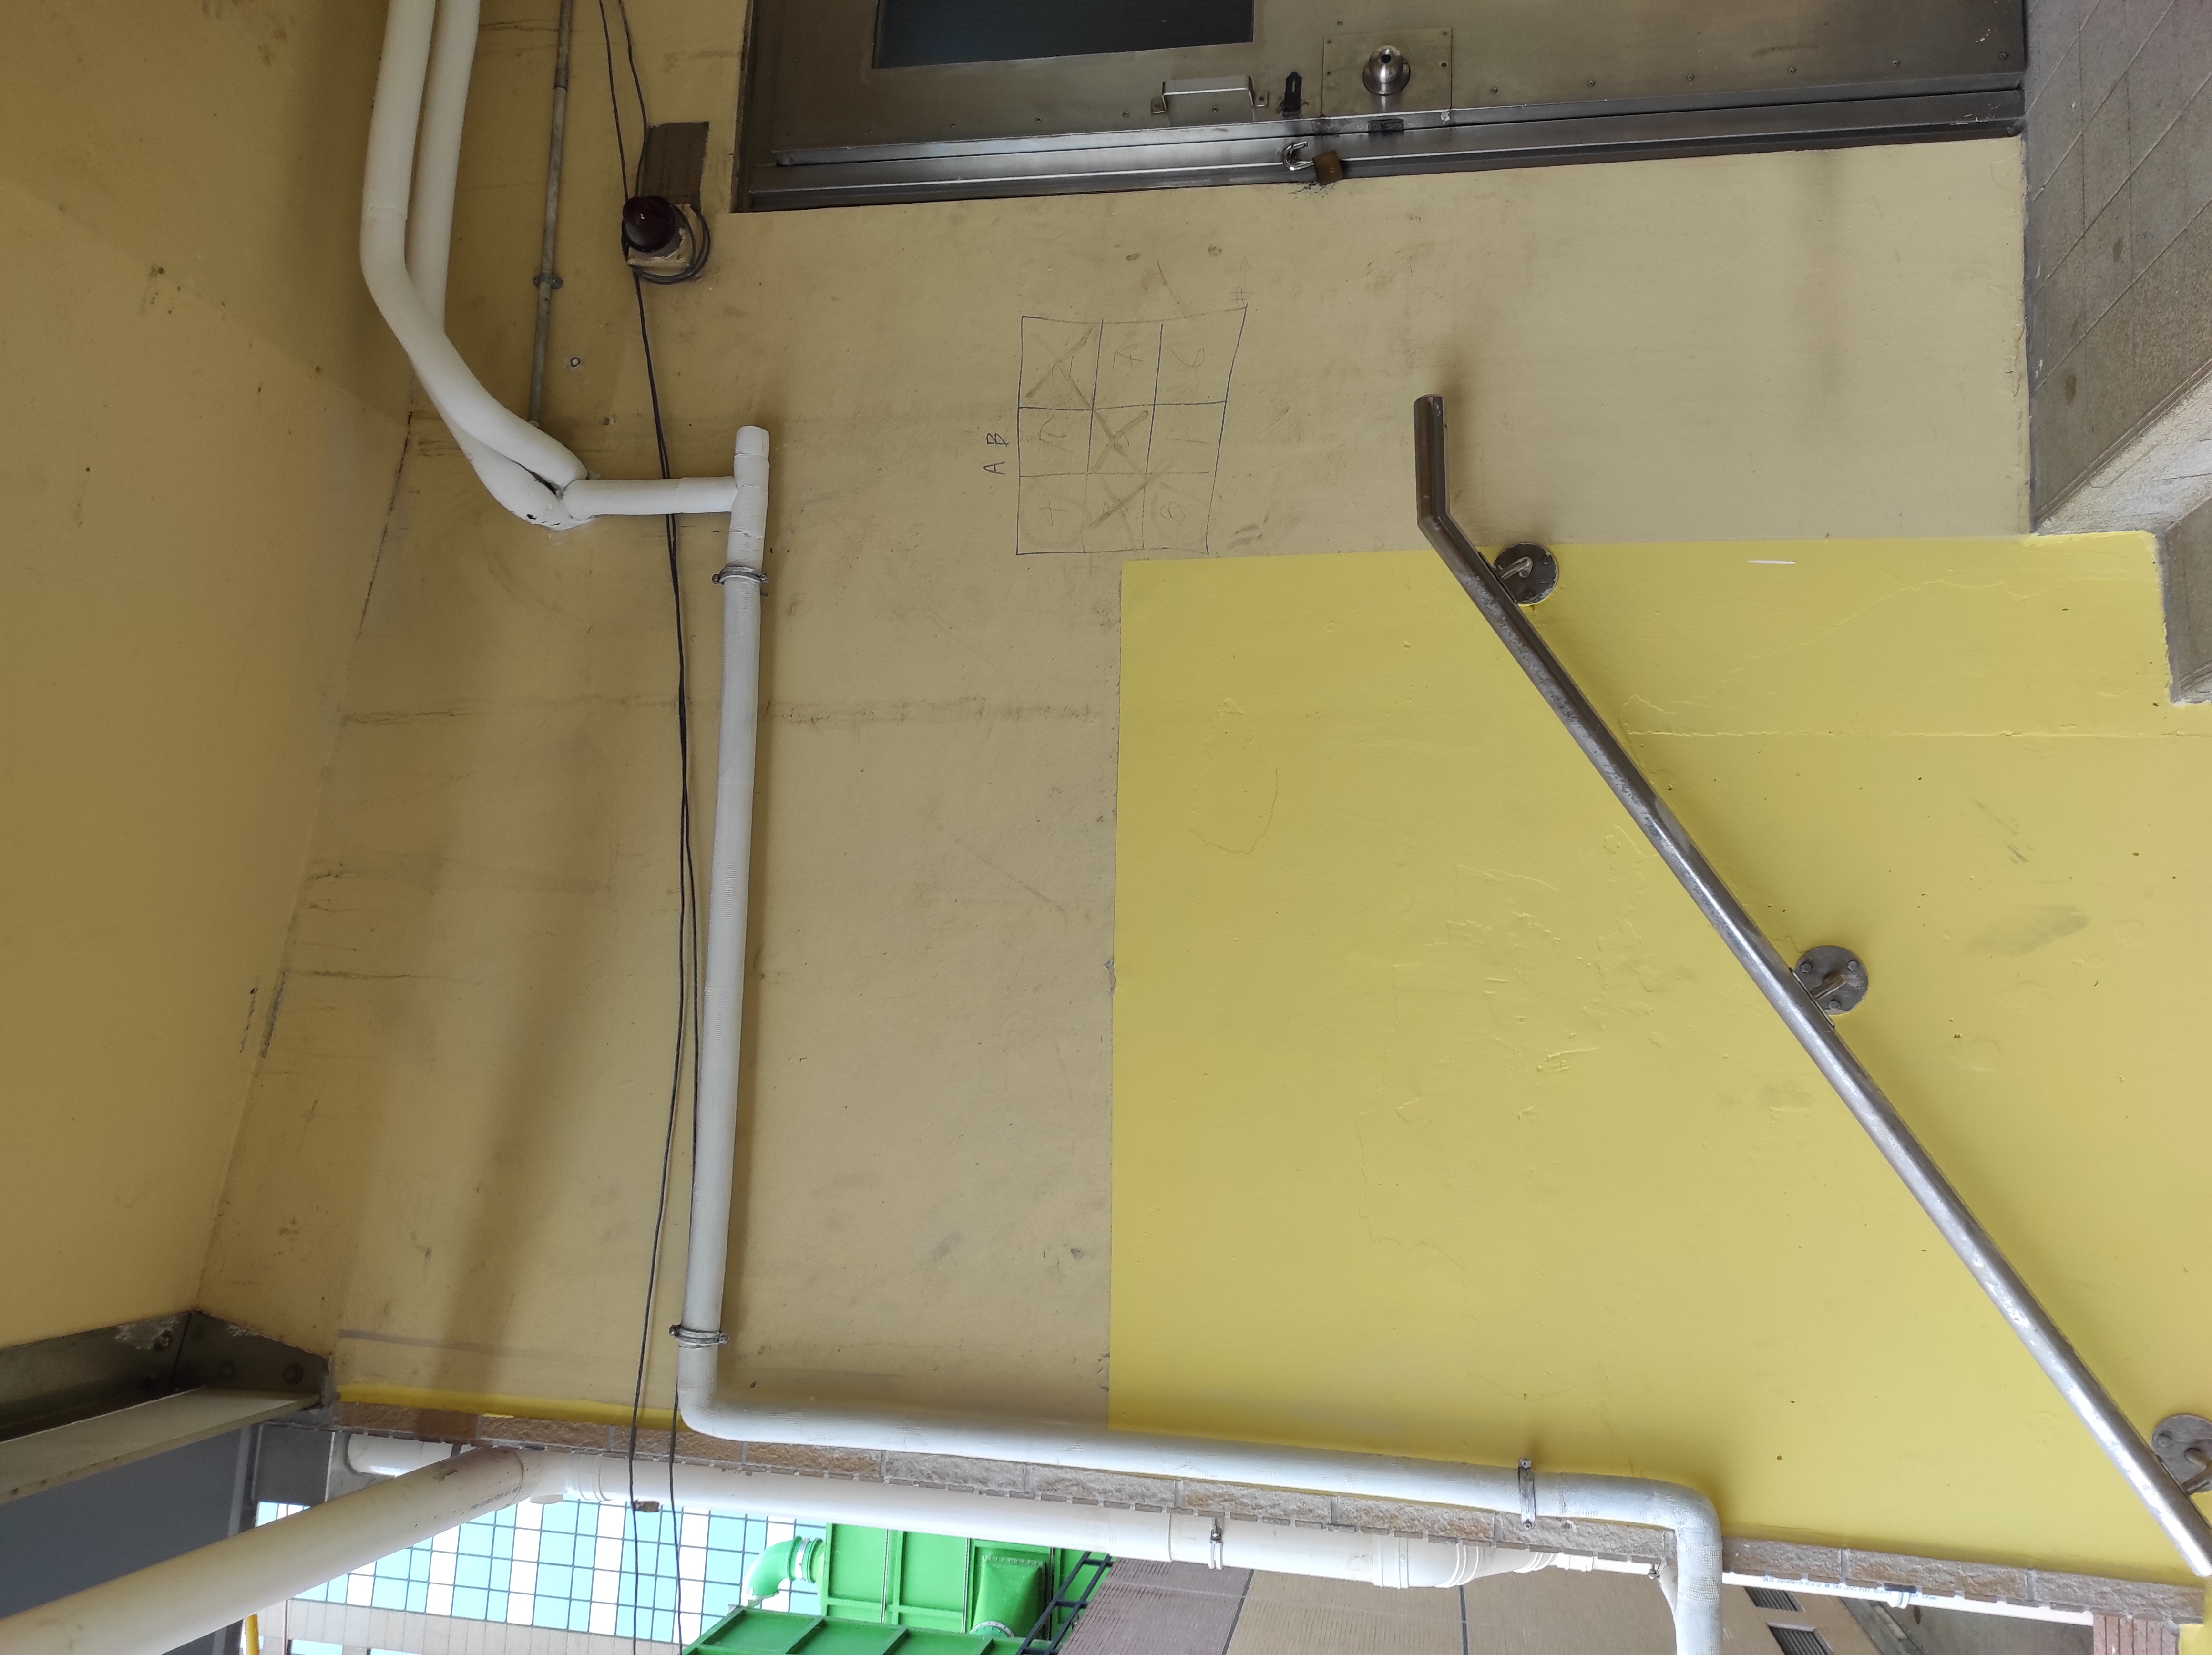 Location of LoRaWan Gateway to be Installed Before Works in DSD Kwun Tong PTW